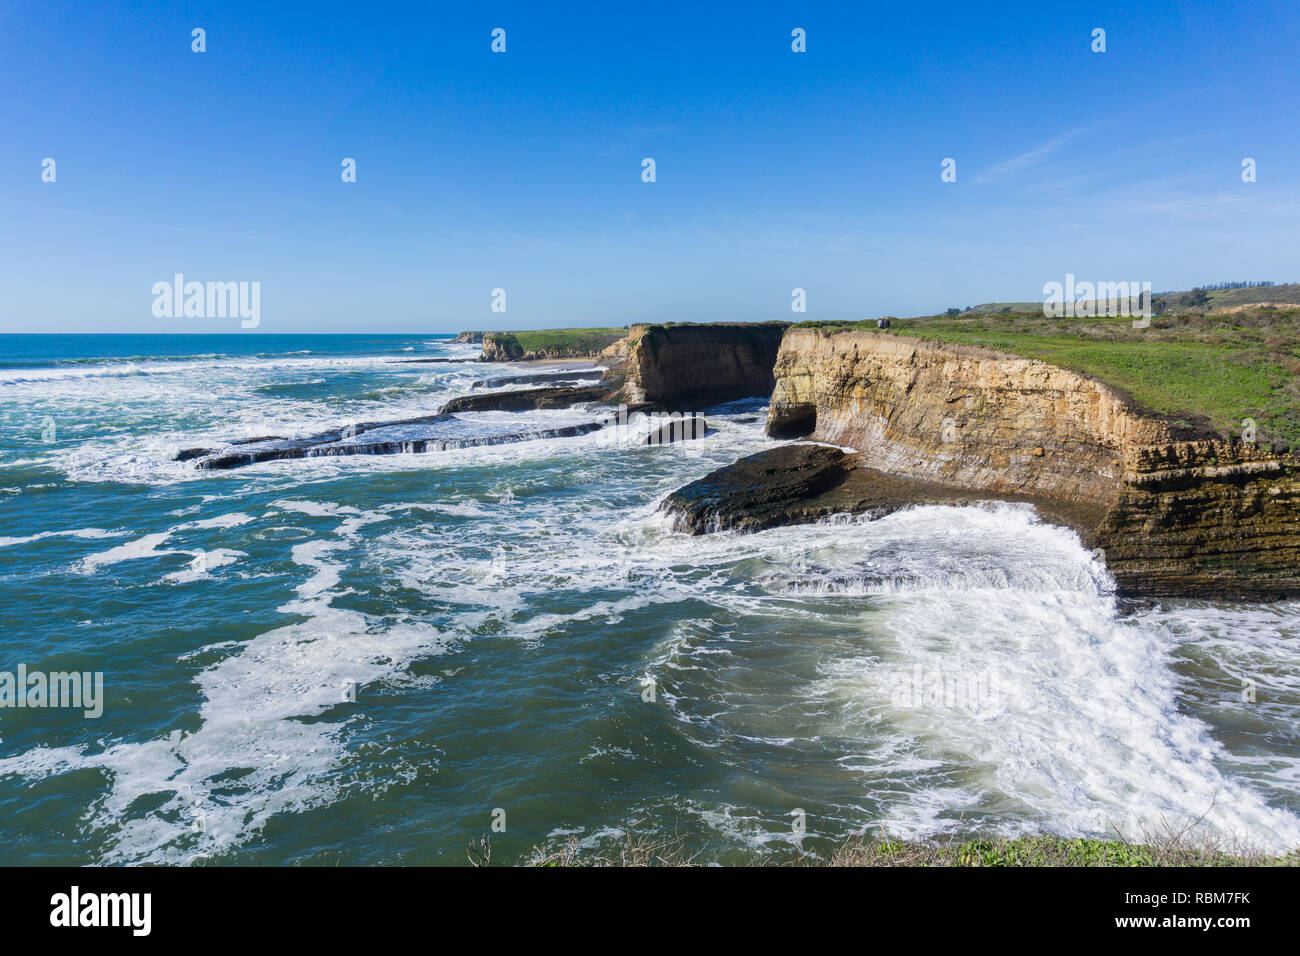 Dramatic landscape of the Pacific Ocean Coast during high tide and strong surf, Wilder Ranch State Park, California Stock Photo